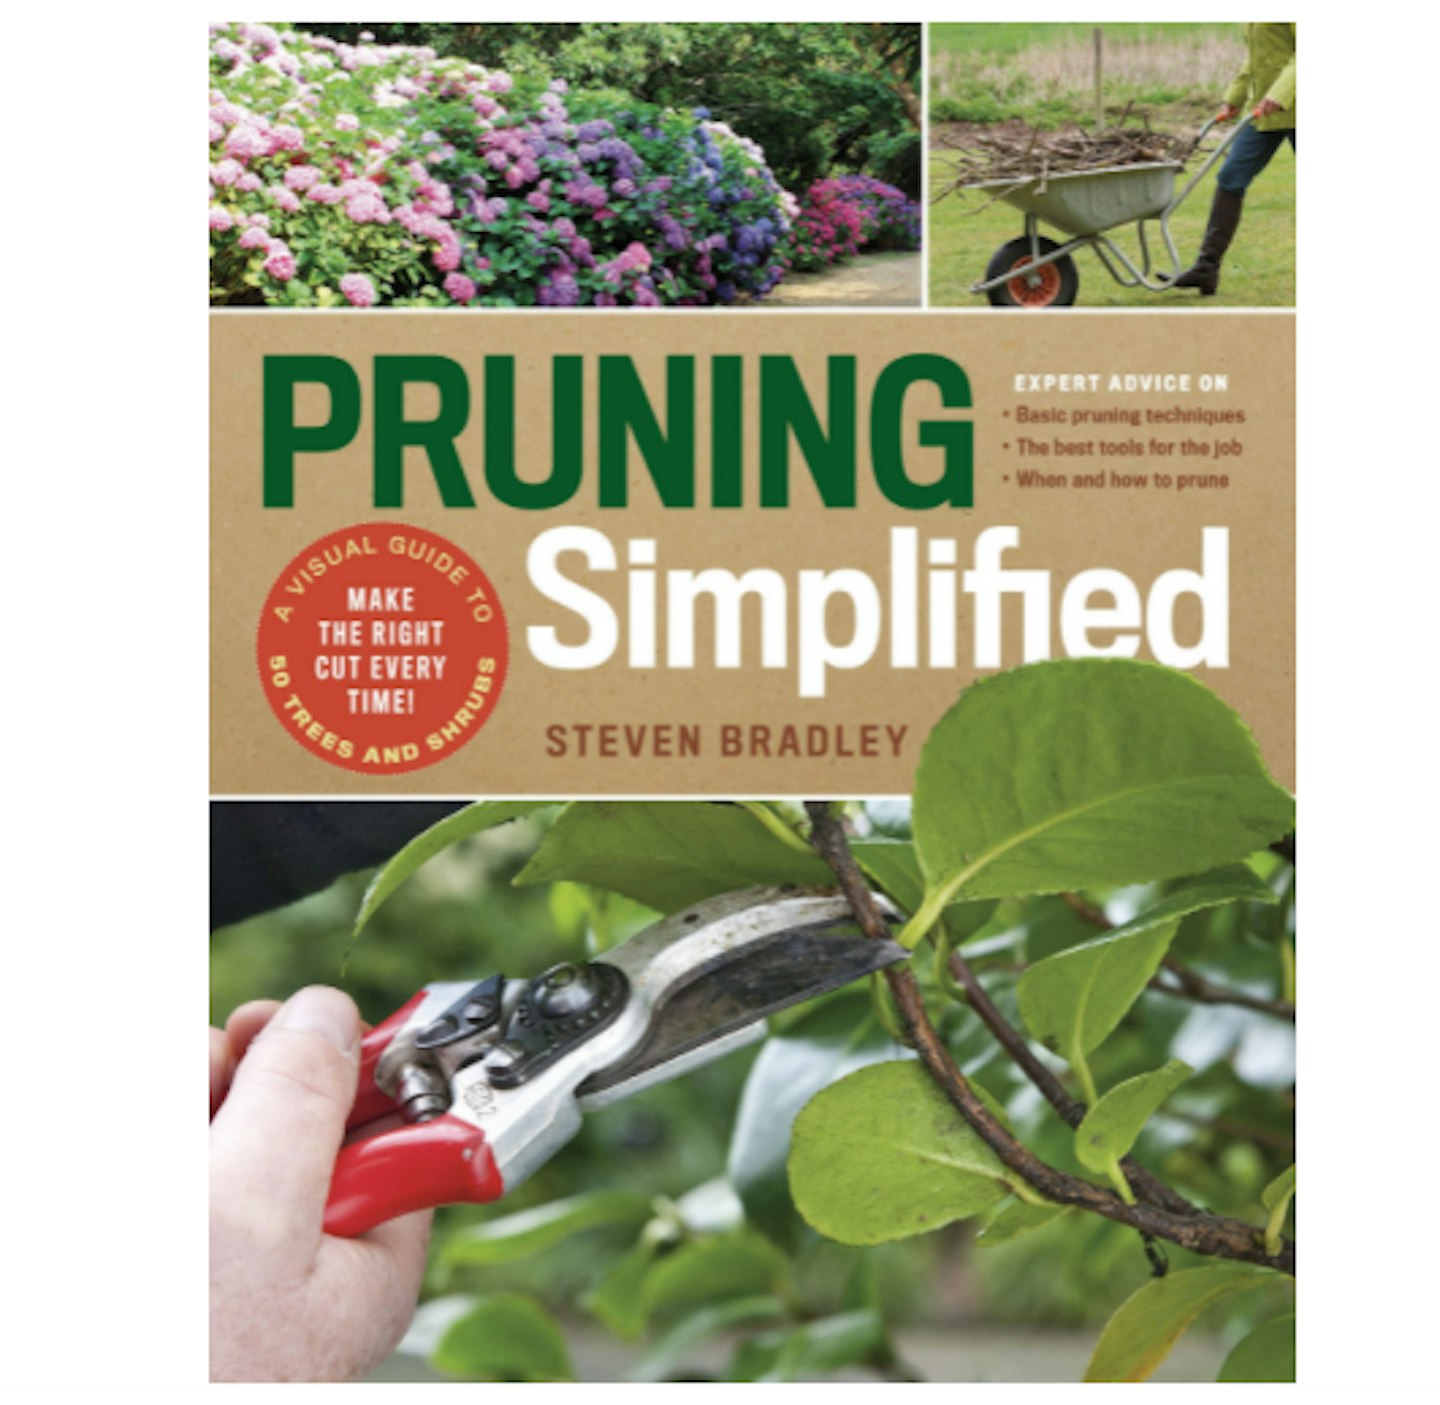 Pruning Simplified: A Step-By-Step Guide to 50 Popular Trees and Shrubs